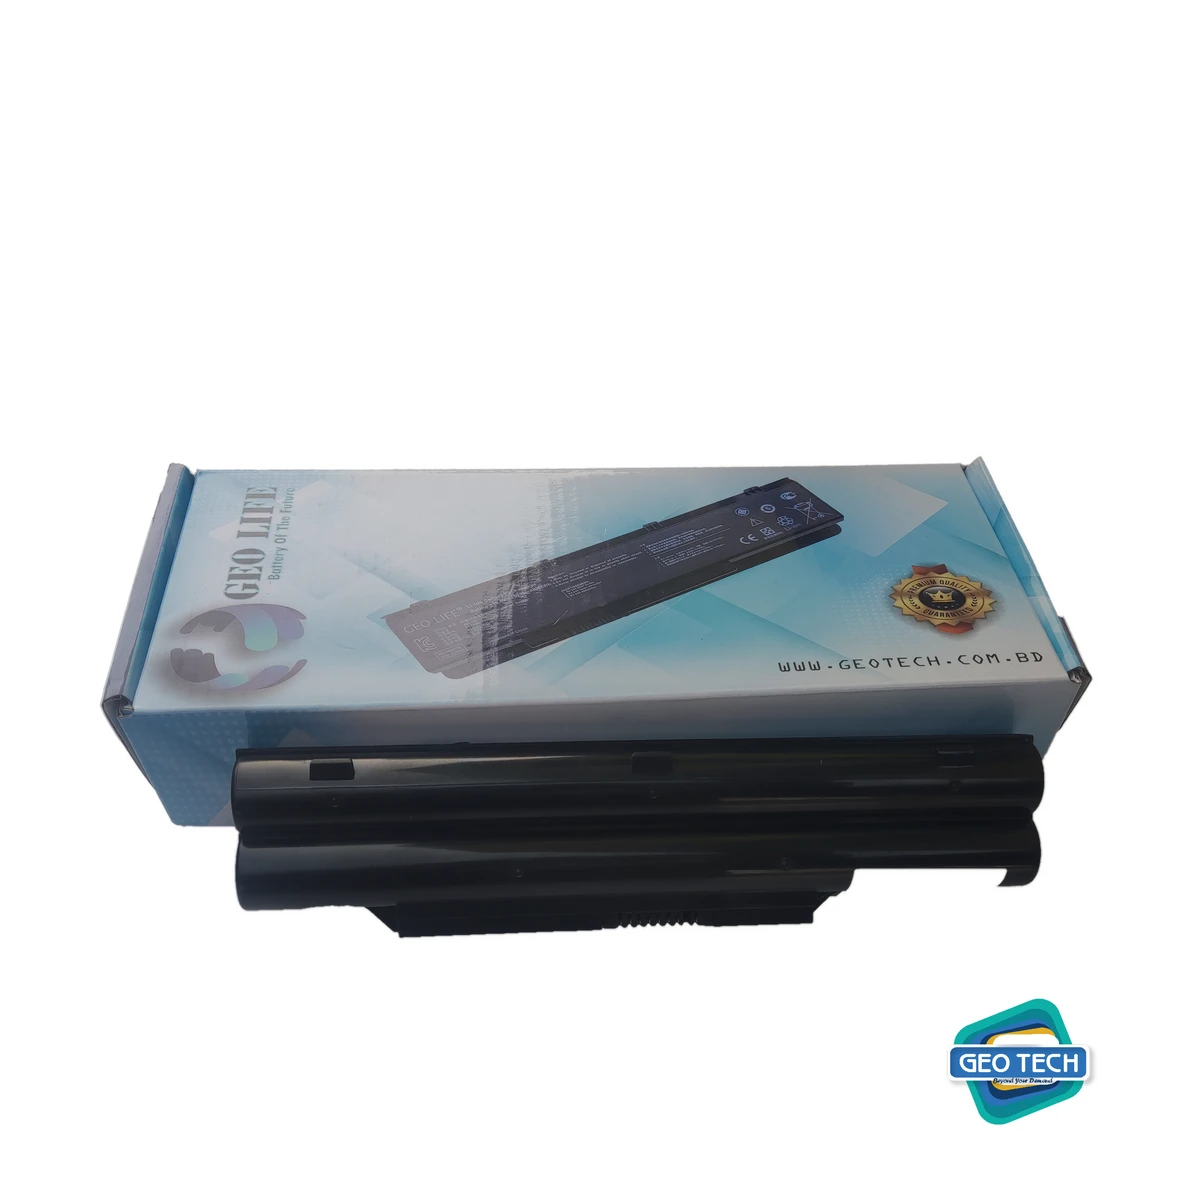 Battery For Fujitsu LifeBook A530 A531 AH530 AH531 LH520 LH522 LH530 Laptop Battery